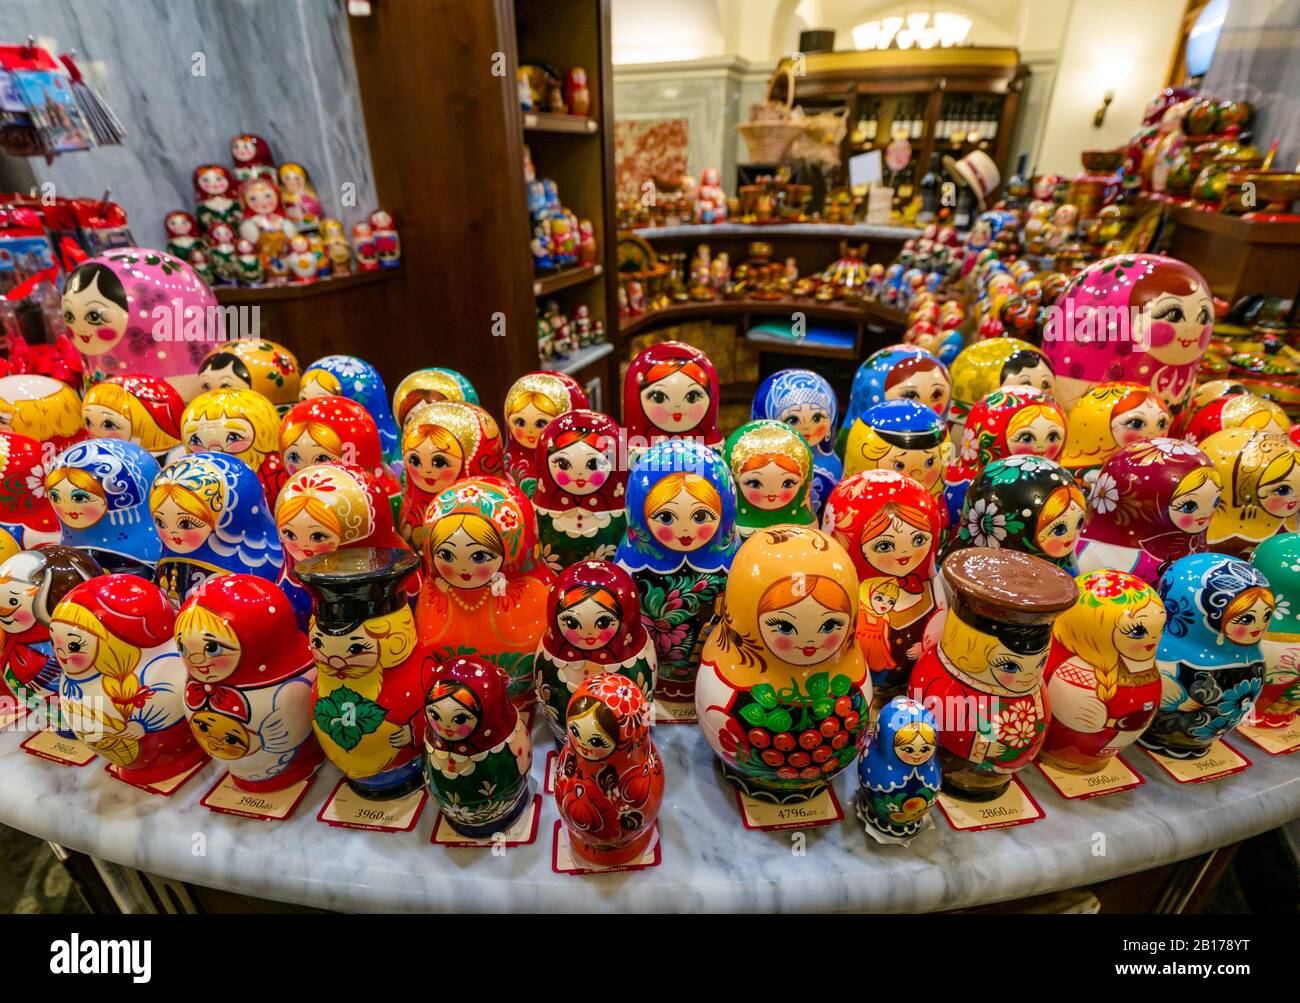 Russian doll souvenirs, GUM department store display, Moscow, Russian Federation Stock Photo